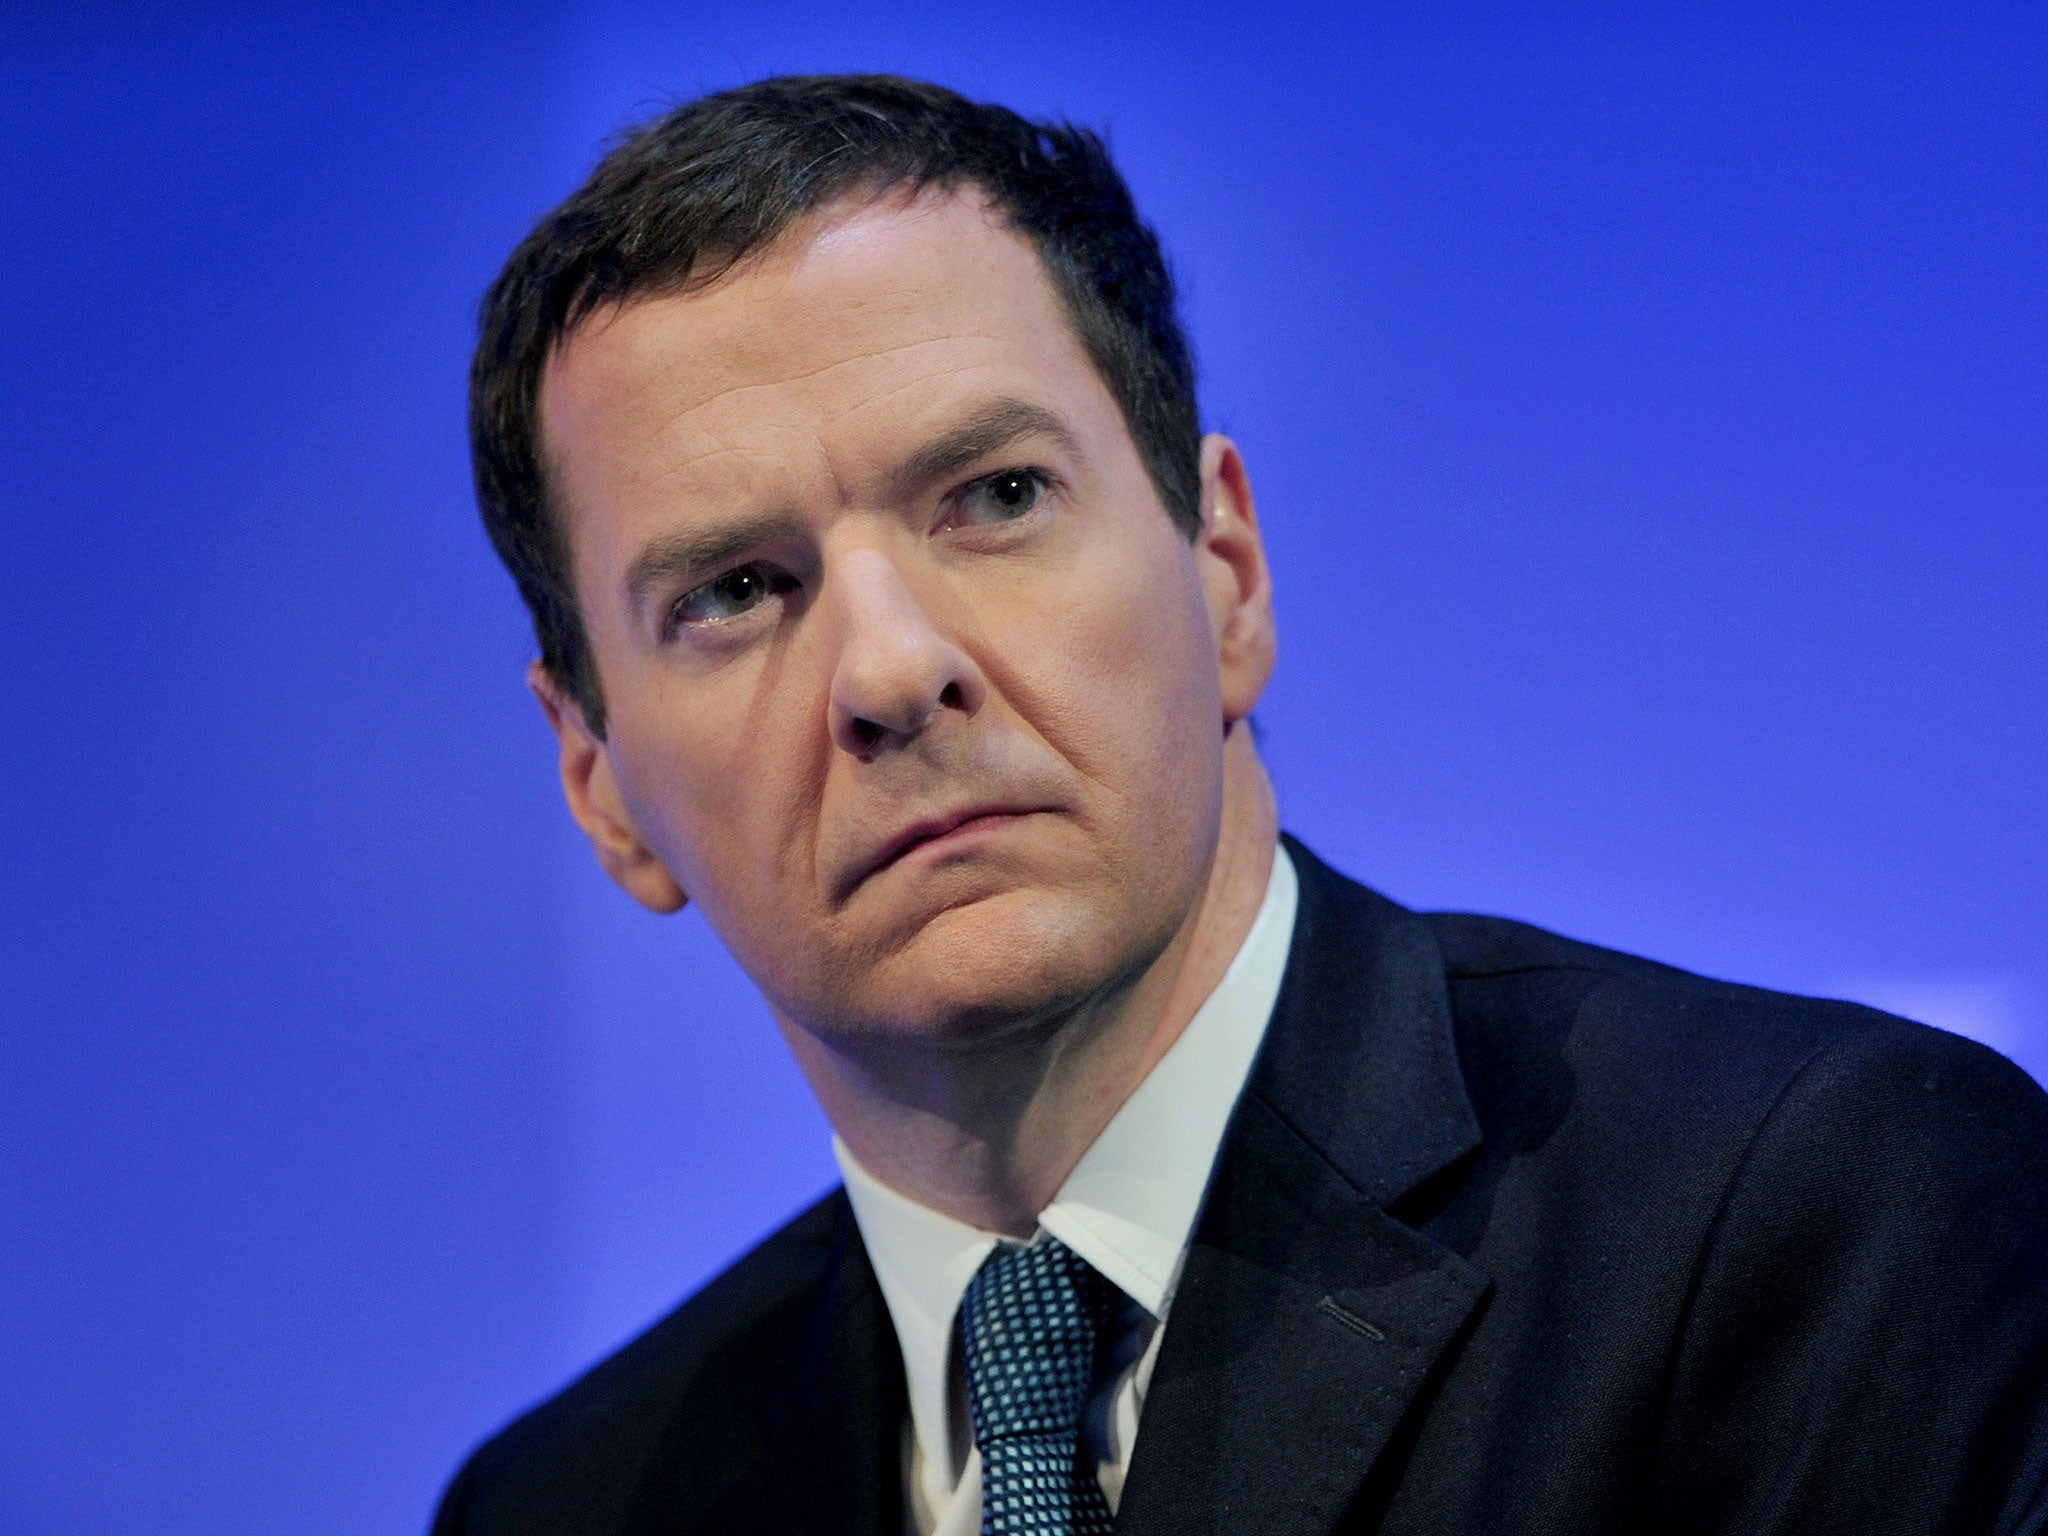 George Osborne, the Chancellor, will announce the Budget on Wednesday